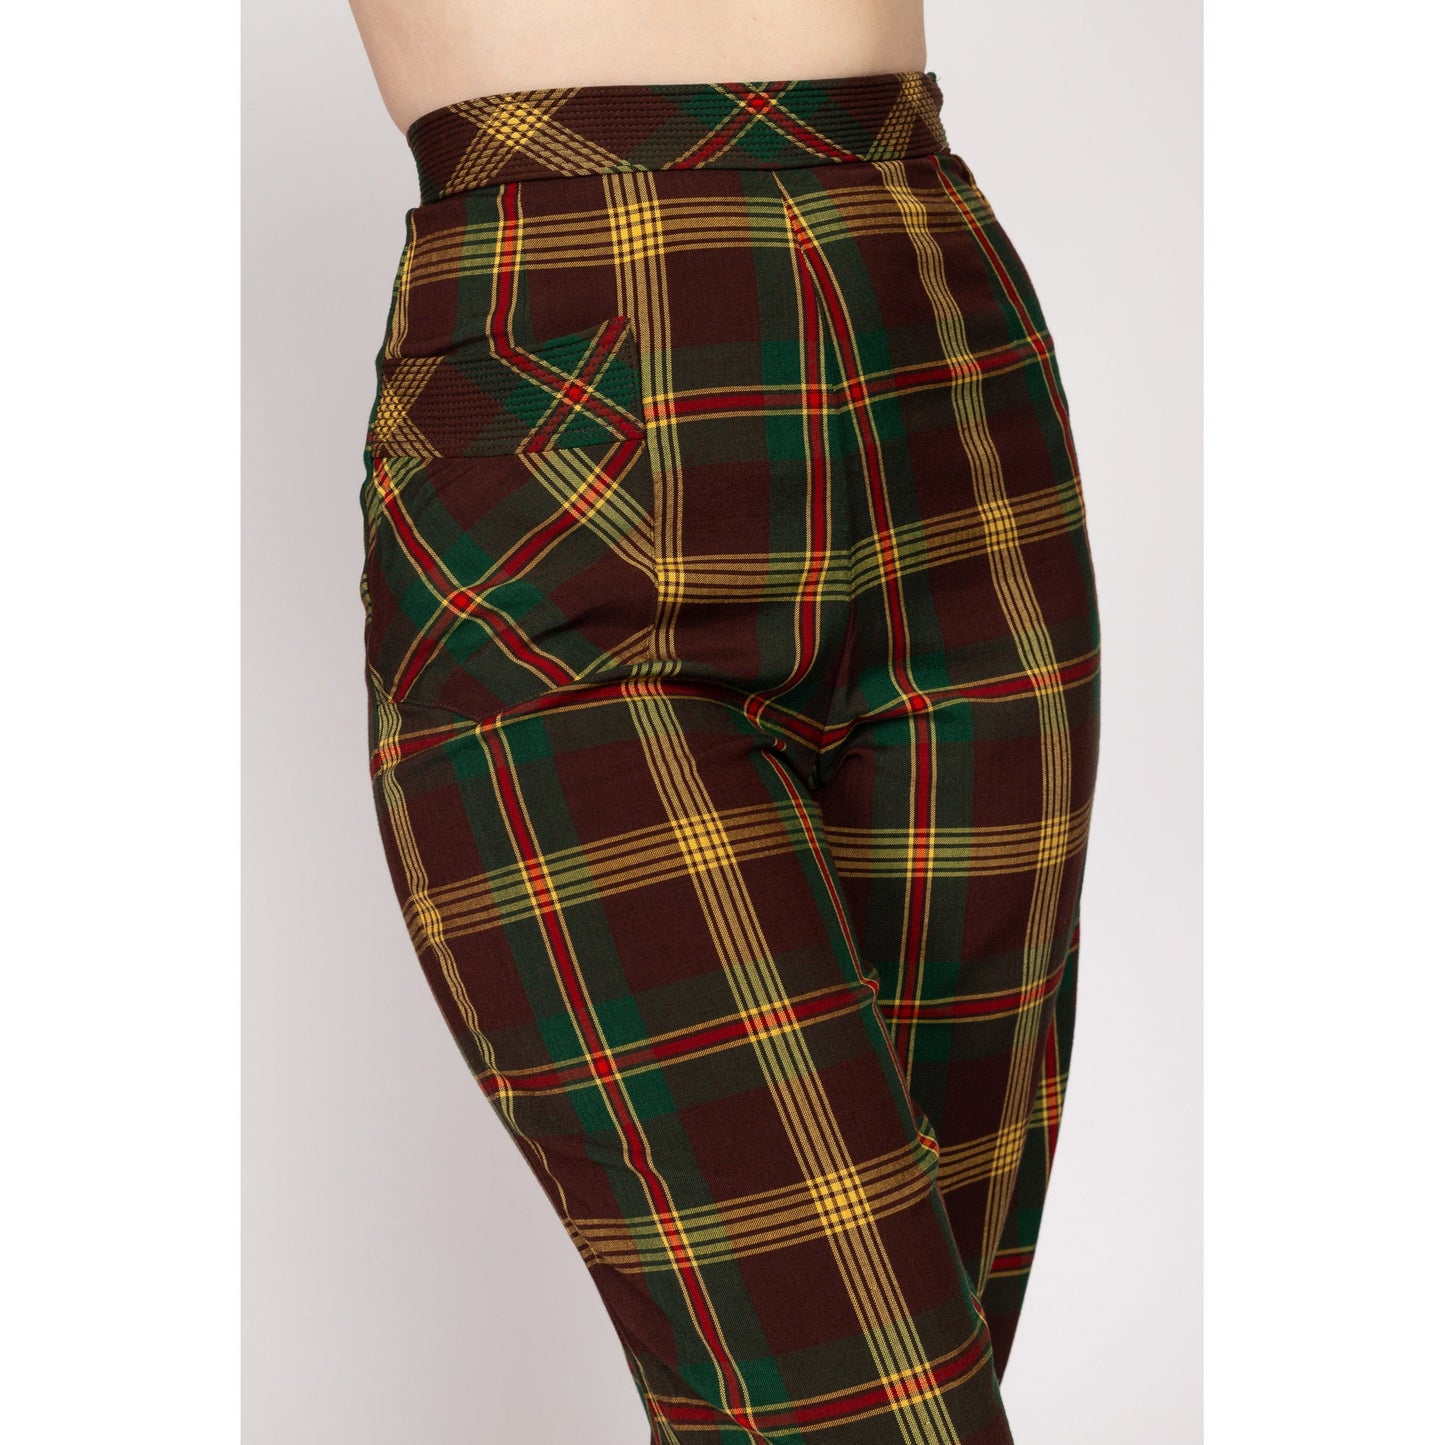 XS 1940s Koret Plaid High Waisted Girdlslax Side Zip Trousers 24" | Retro Vintage 40s Brown Yellow Tapered Leg Pants